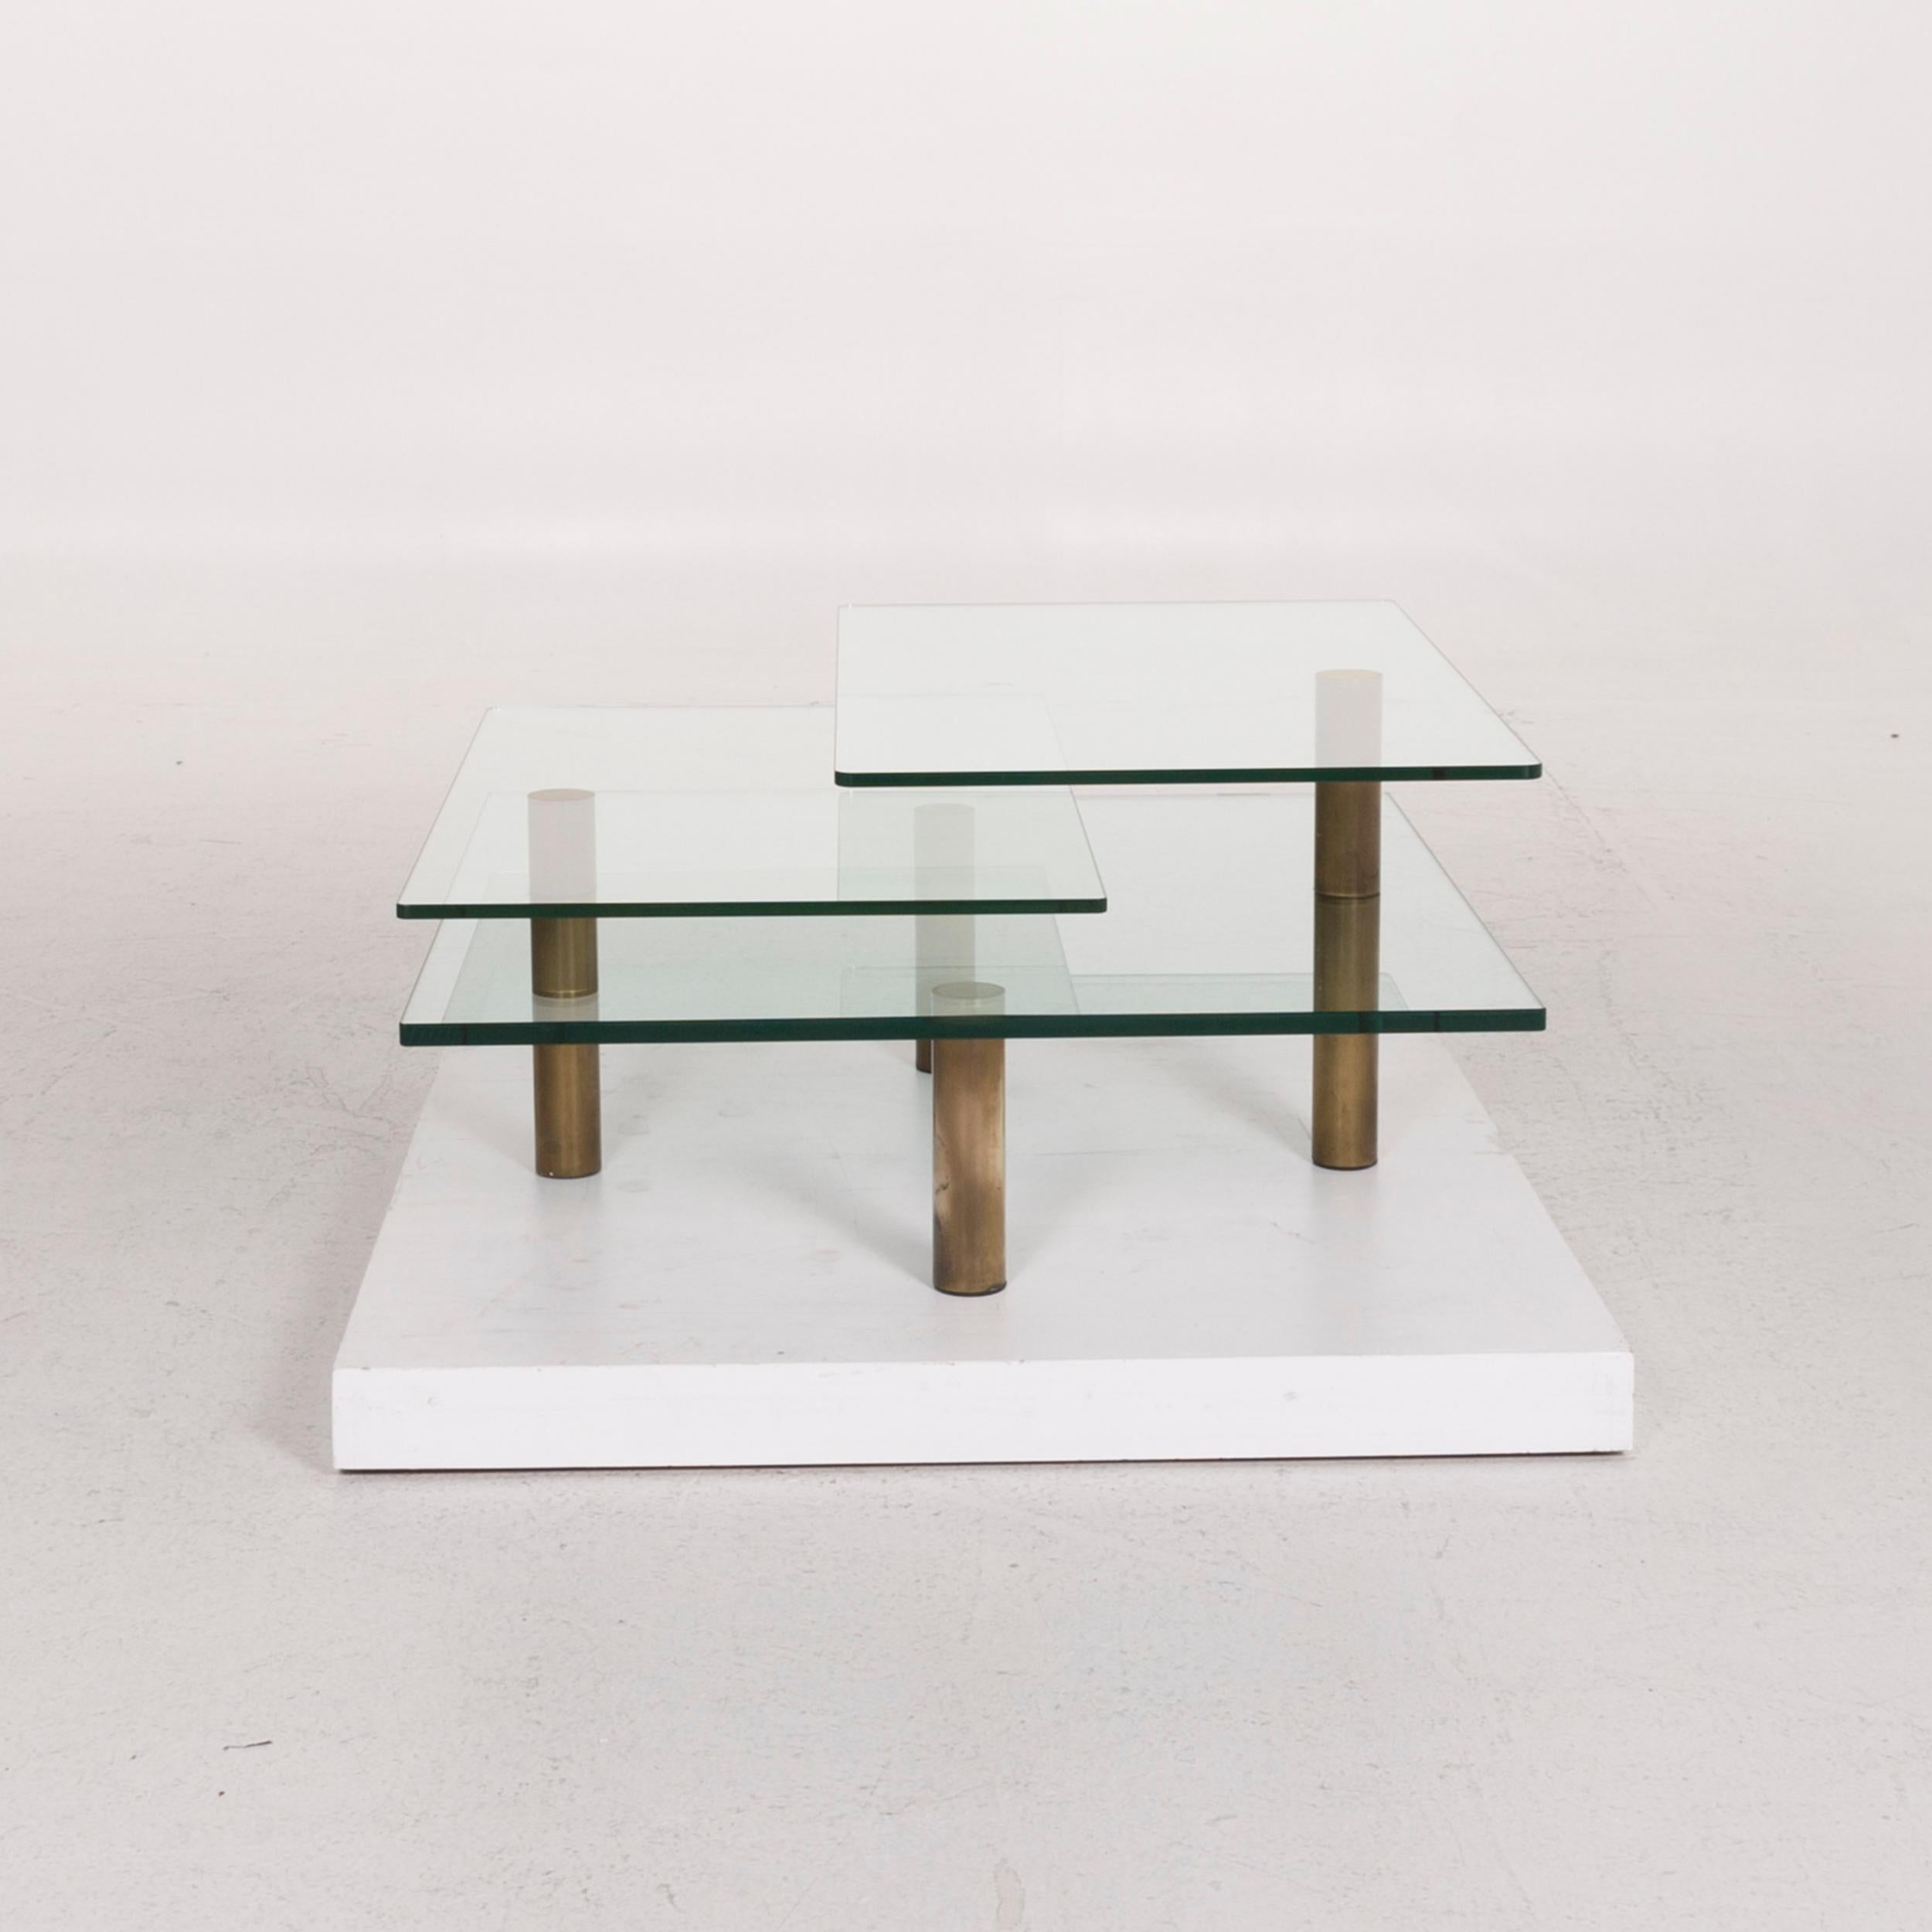 Draenert Imperial Glass Coffee Table Incl. Function In Good Condition For Sale In Cologne, DE